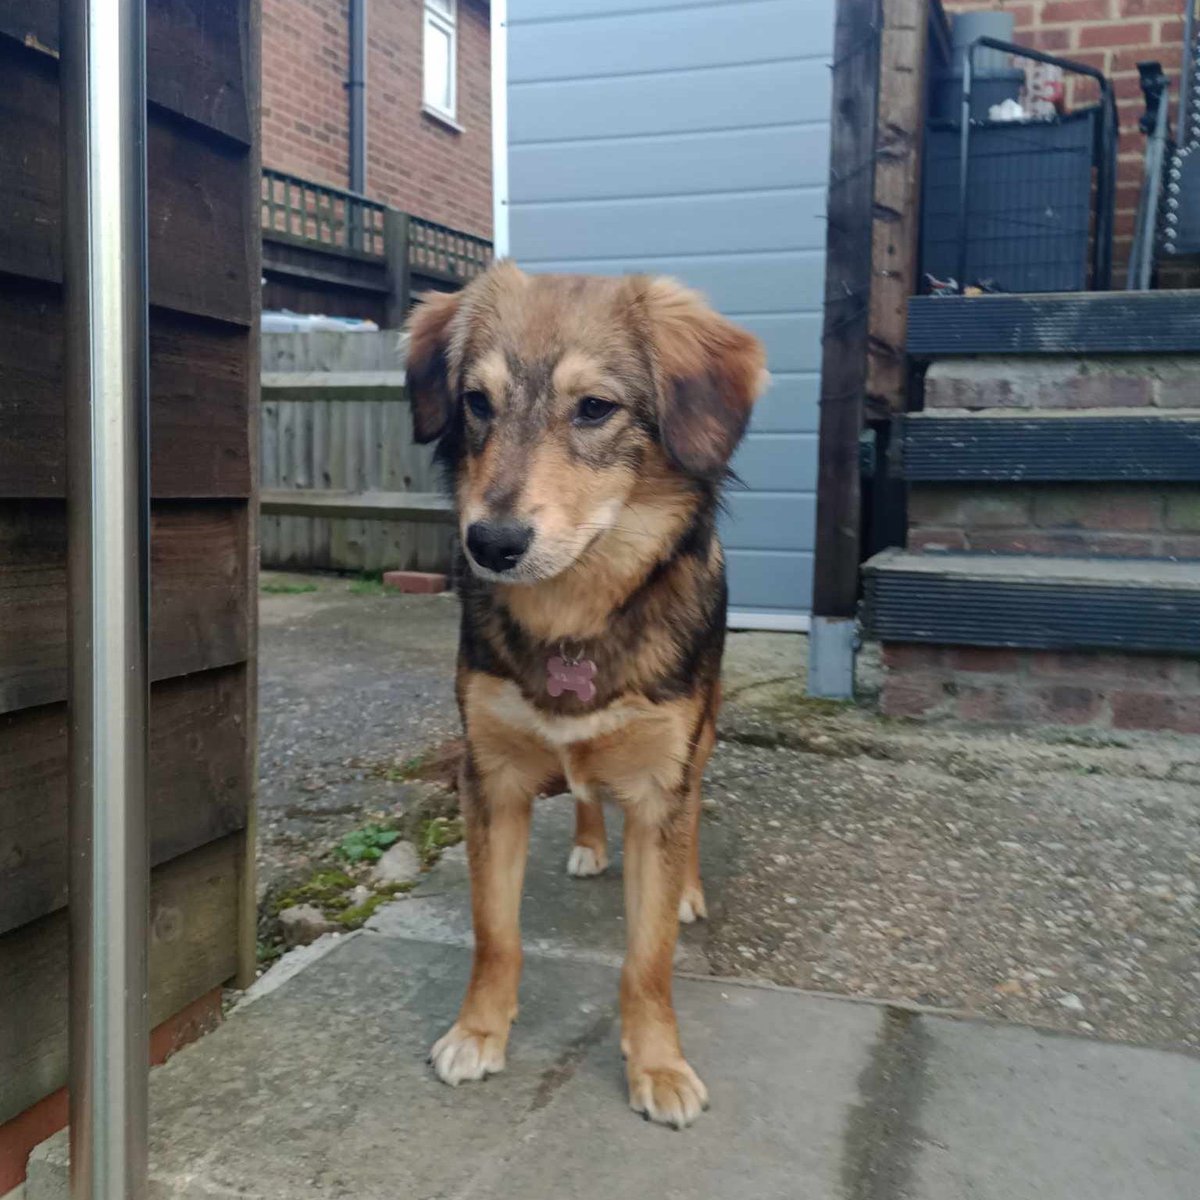 Minnie is in #BUCKINGHAMSHIRE  Unfortunately after just a month Minnie is looking for a new family. She is 9 months old and the teenage daughter hasn't bonded with her. Minnie is a normal playful pup who would benefit from some basic guidance. 
#Northamptonshire #Bedfordshire